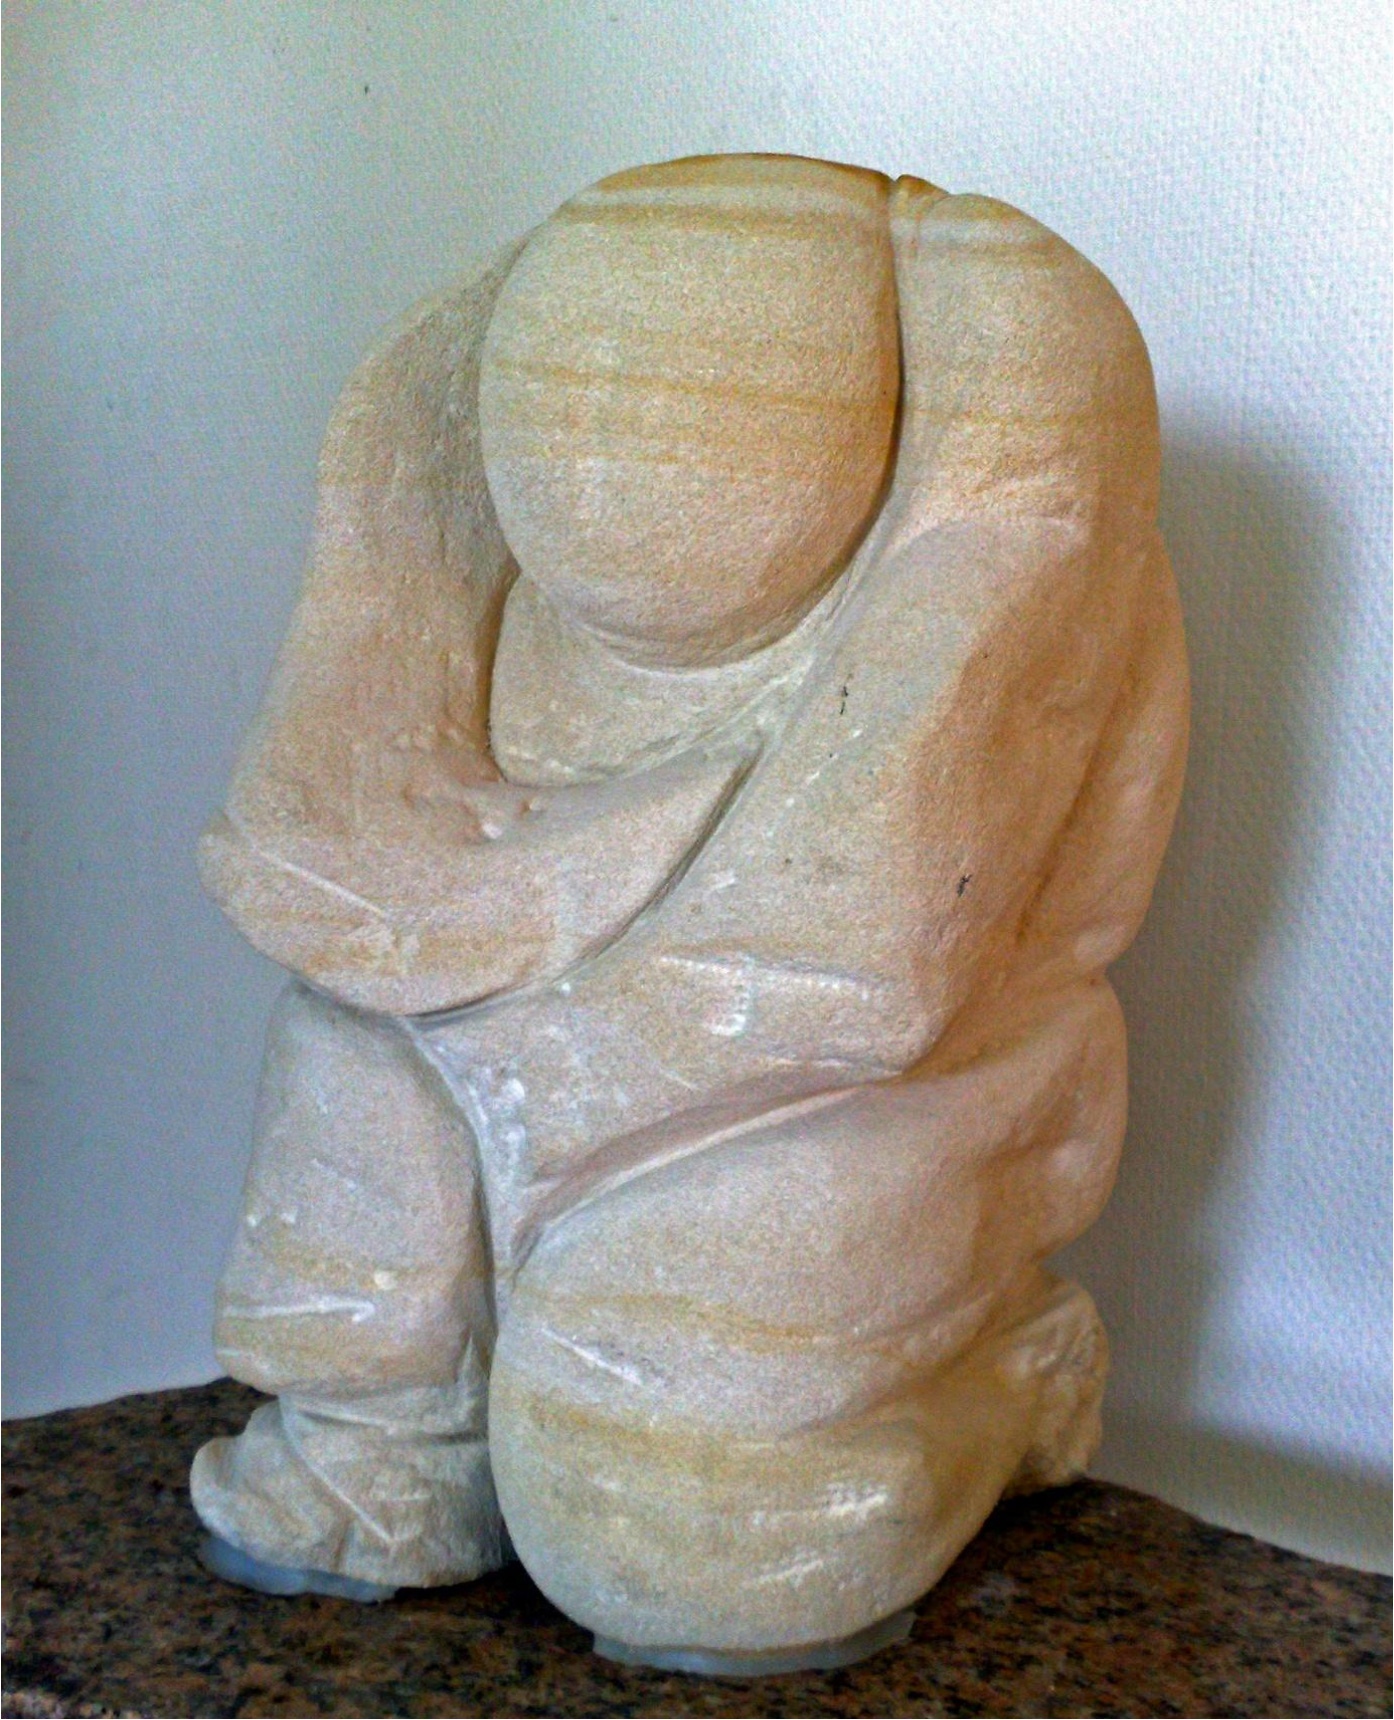 Praying Shaman 2007, French mergel. A Peruvian shaman: “Now that I’m old, I don’t sleep, so I can pray day and night”